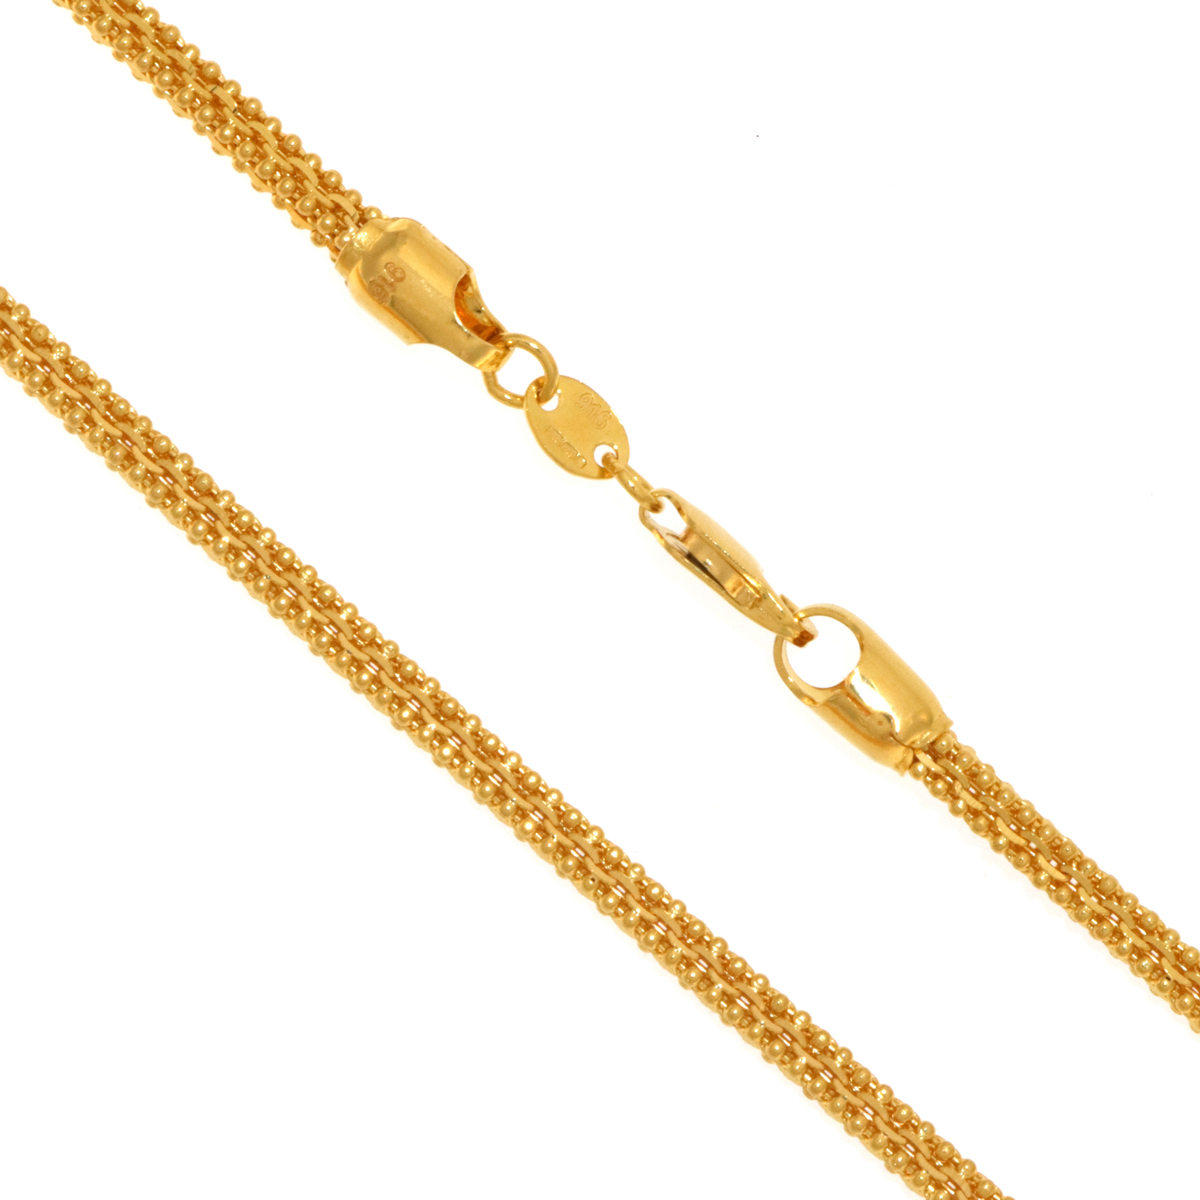 22ct Real Gold Asian/Indian/Pakistani Style Chain